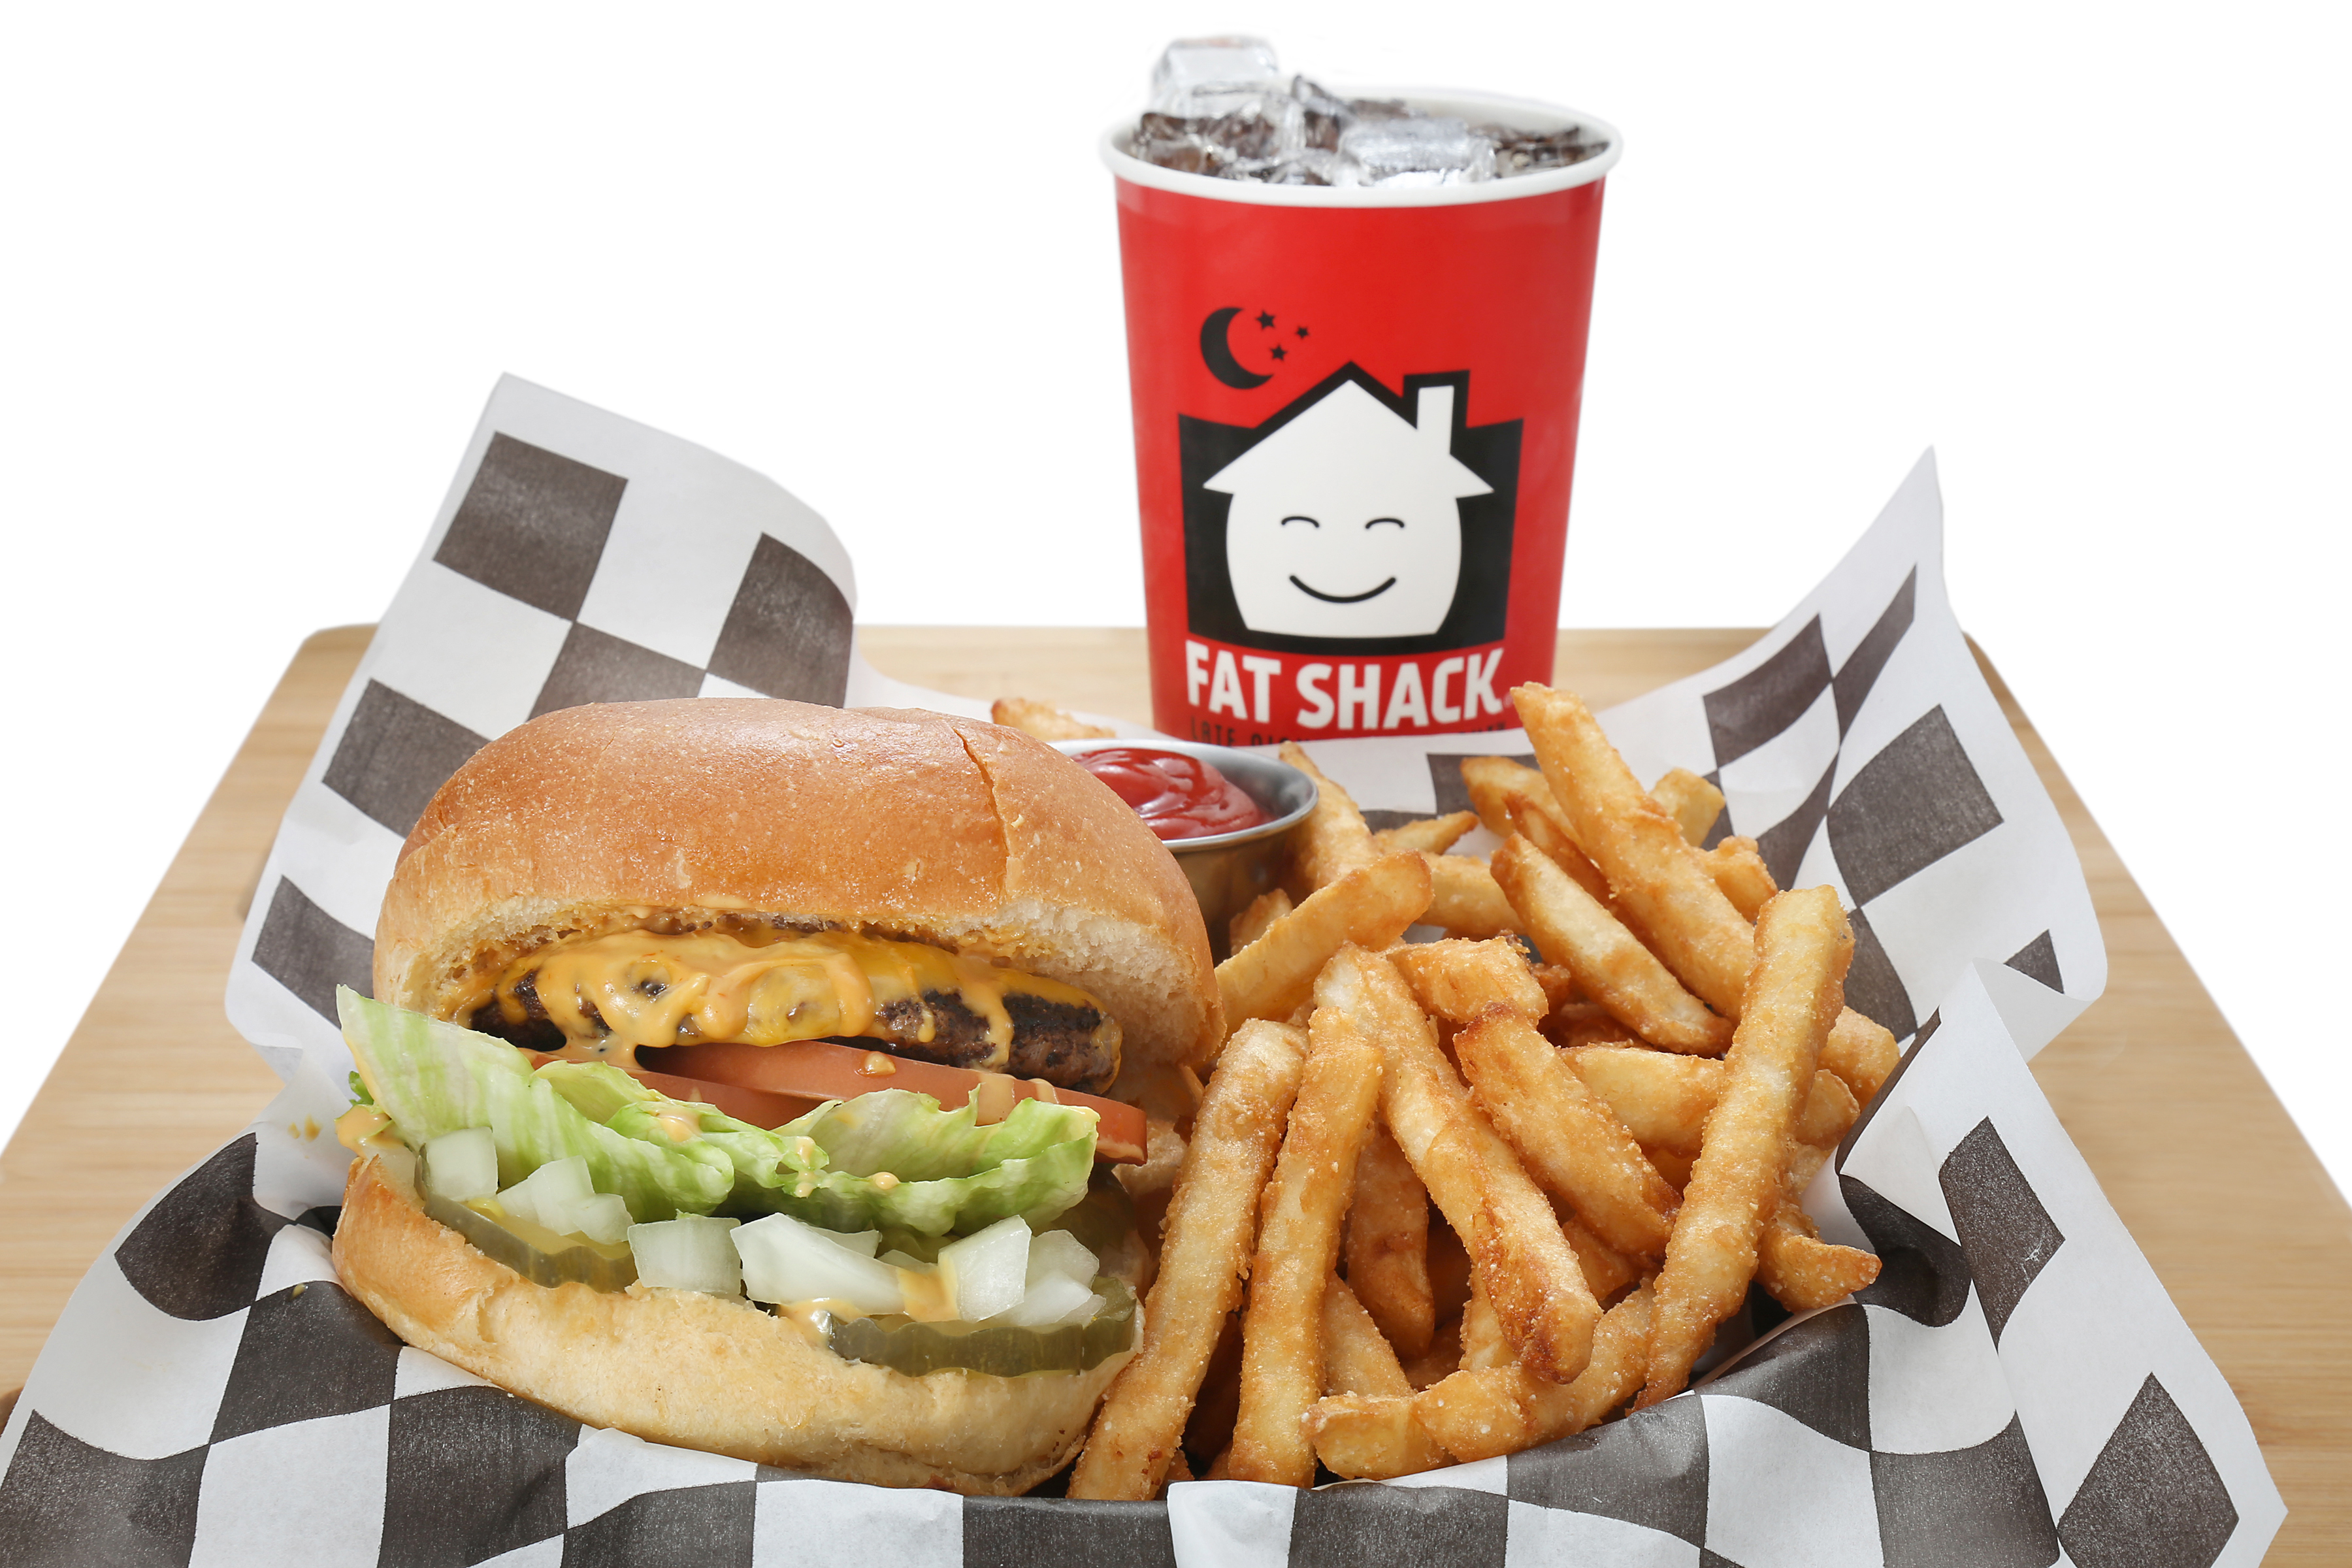 Fat Shack specializes in late-night snacks, such as burgers and fries, pictured here.